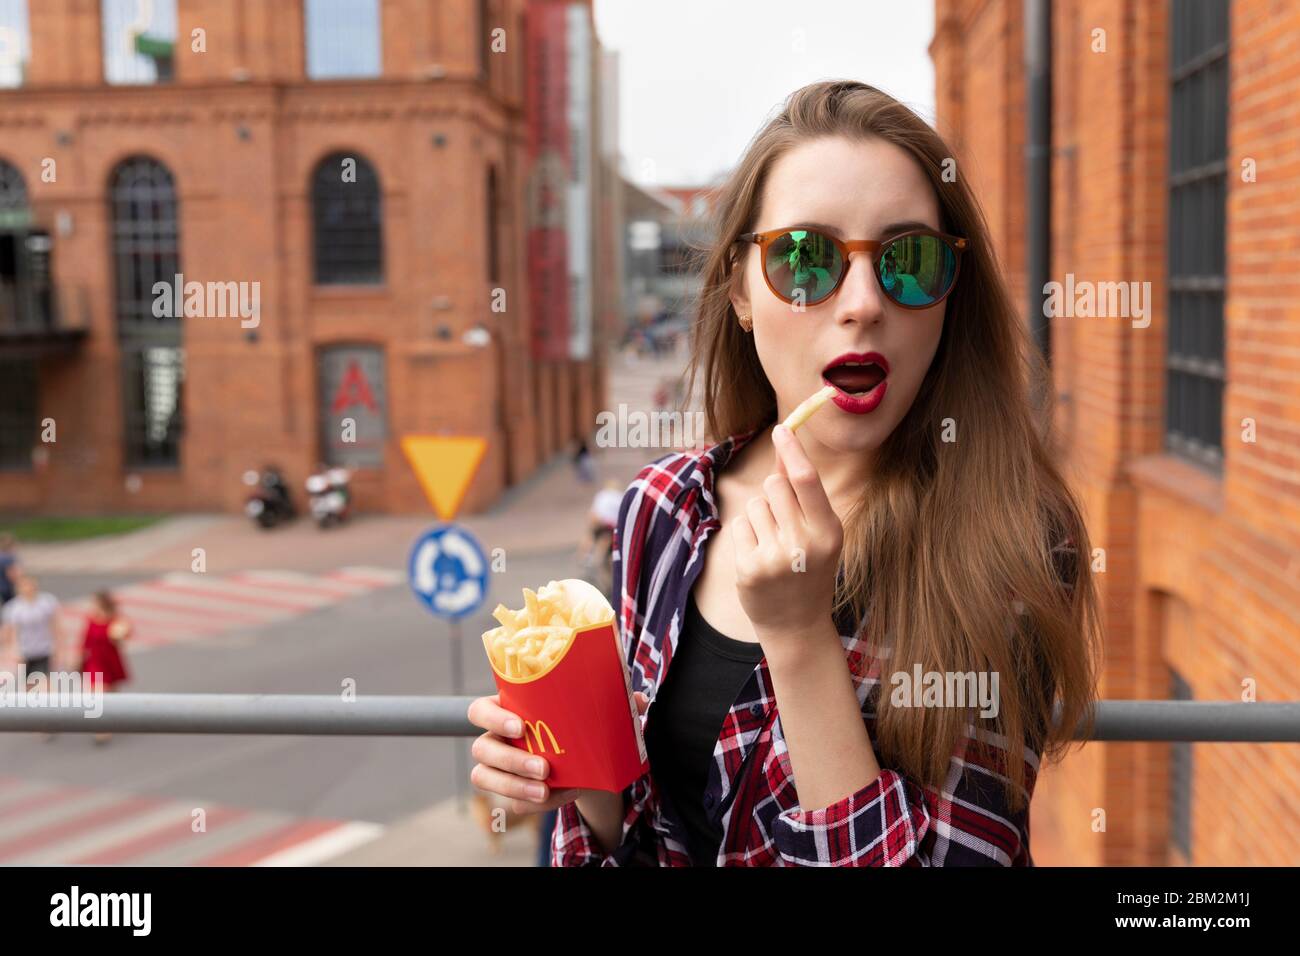 LODZ, POLAND - AUGUST 17, 2019: young girl eats french fries from a chain of McDonald's restaurants. The girl is having fun posing with her food. Stock Photo